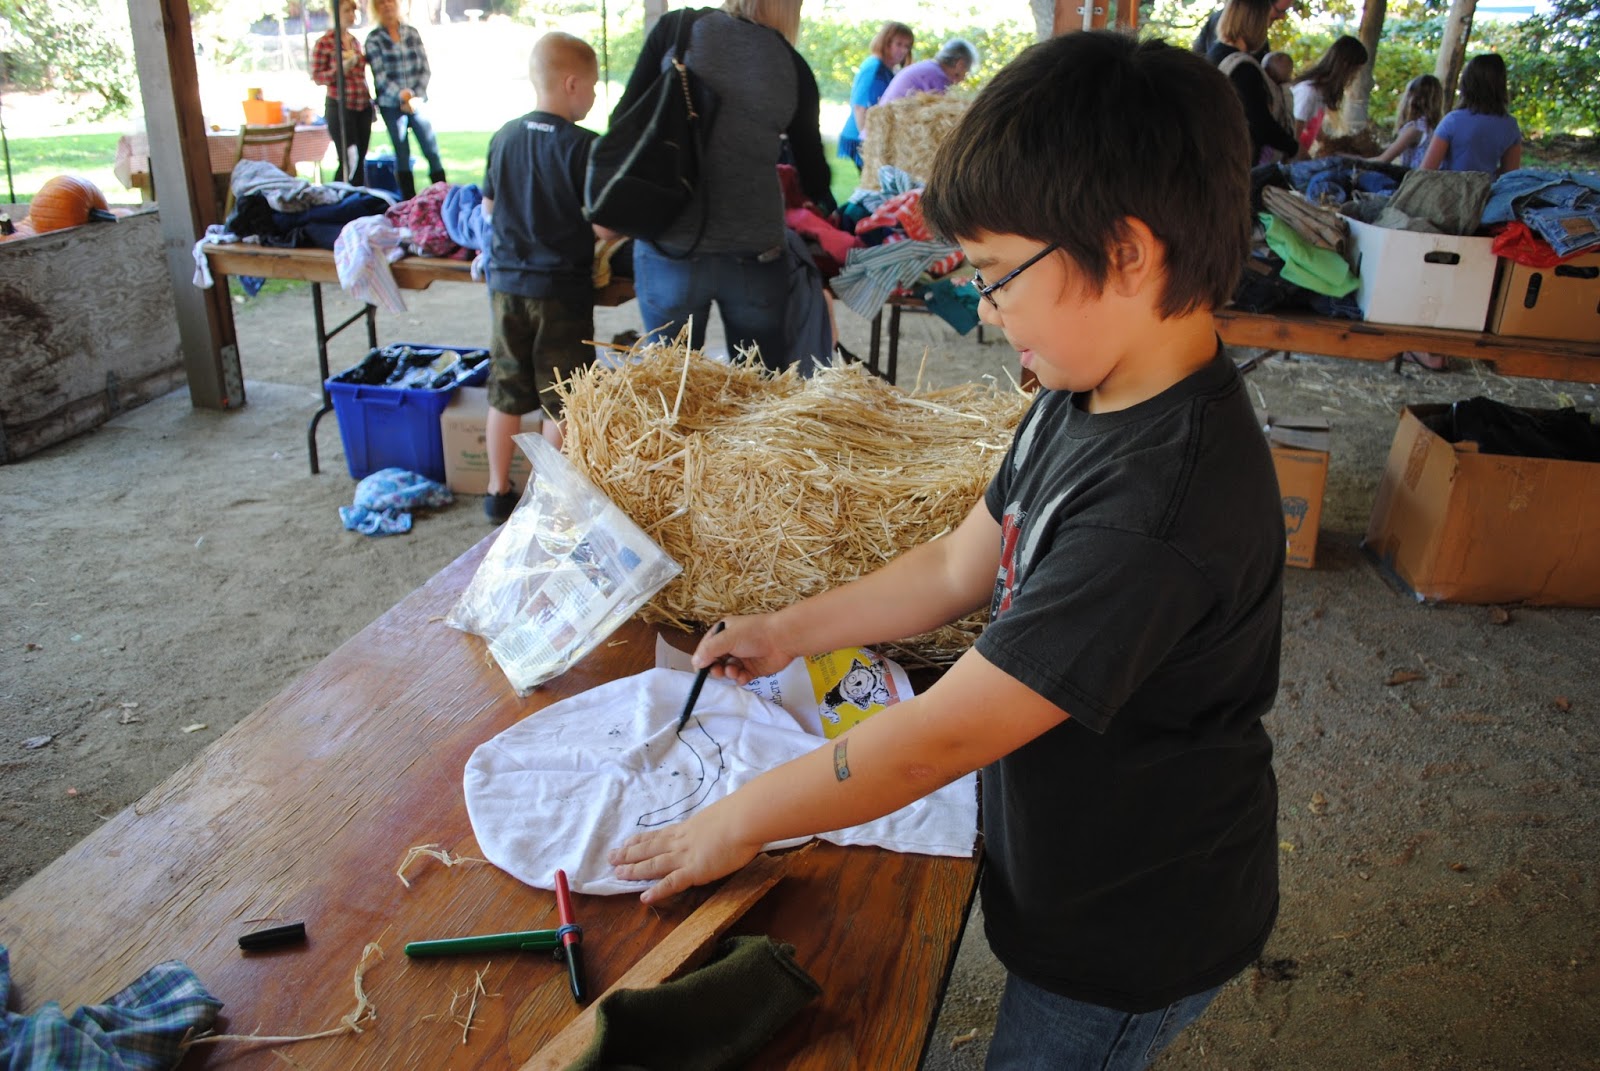 HANLEY FARM SCARECROW FESTIVAL - FALL - Pumpkin Painting - Kids - What to to do in Southern Oregon